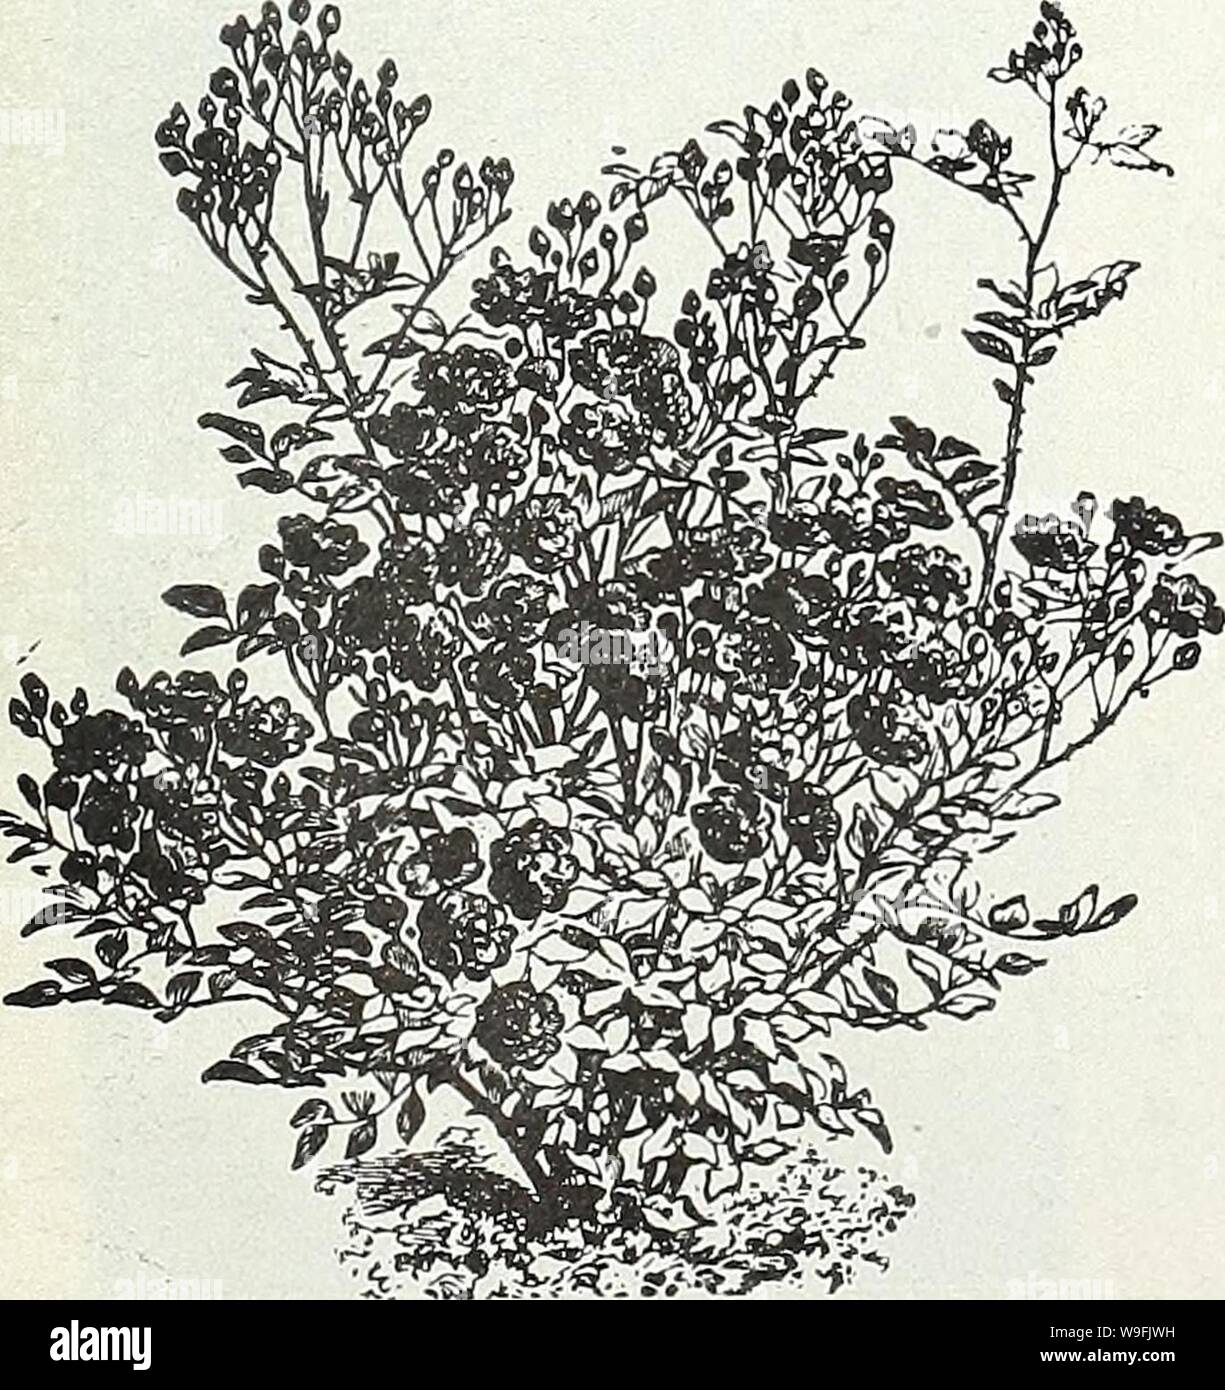 Archive image from page 48 of Currie's garden annual  spring. Currie's garden annual : spring 1931 56th year  curriesgardenann19curr Year: 1931 ( CURRIE BROTHERS CO. MILWAUKEE, WISCONSIN SOLANUM A very useful ornamental pot plant for winter decoration, bearing in the greatest profusion, bright scarlet globular berries. Pkt. Capsicastrum Nanum (Jerusalem Cherry) .. .$0.10 Cleveland!, or Cleveland Cherry—An improve- ment on the foregoing, carrying the fruits well above the foliage and in greater pro- fusion 20 RANUNCULUS ASIATICUS IMPROVED PALESTINE STRAIN (RAGIONIERI) A remarkable creation of t Stock Photo